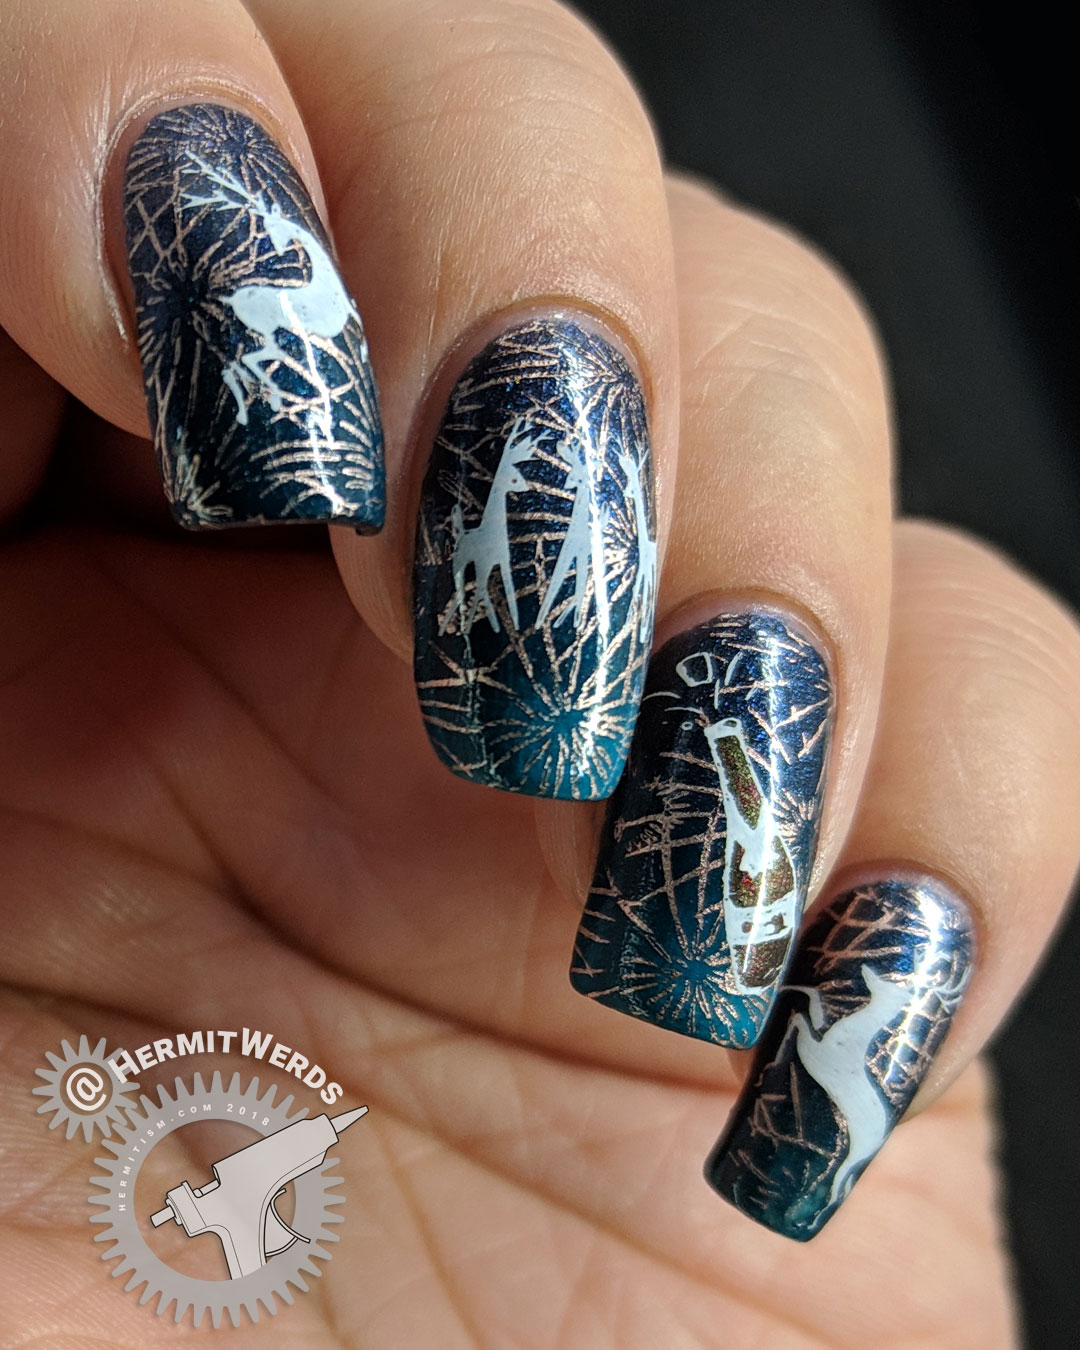 Reindeer Afterparty - Hermit Werds - teal nail art with partying reindeer and fireworks stamped on top